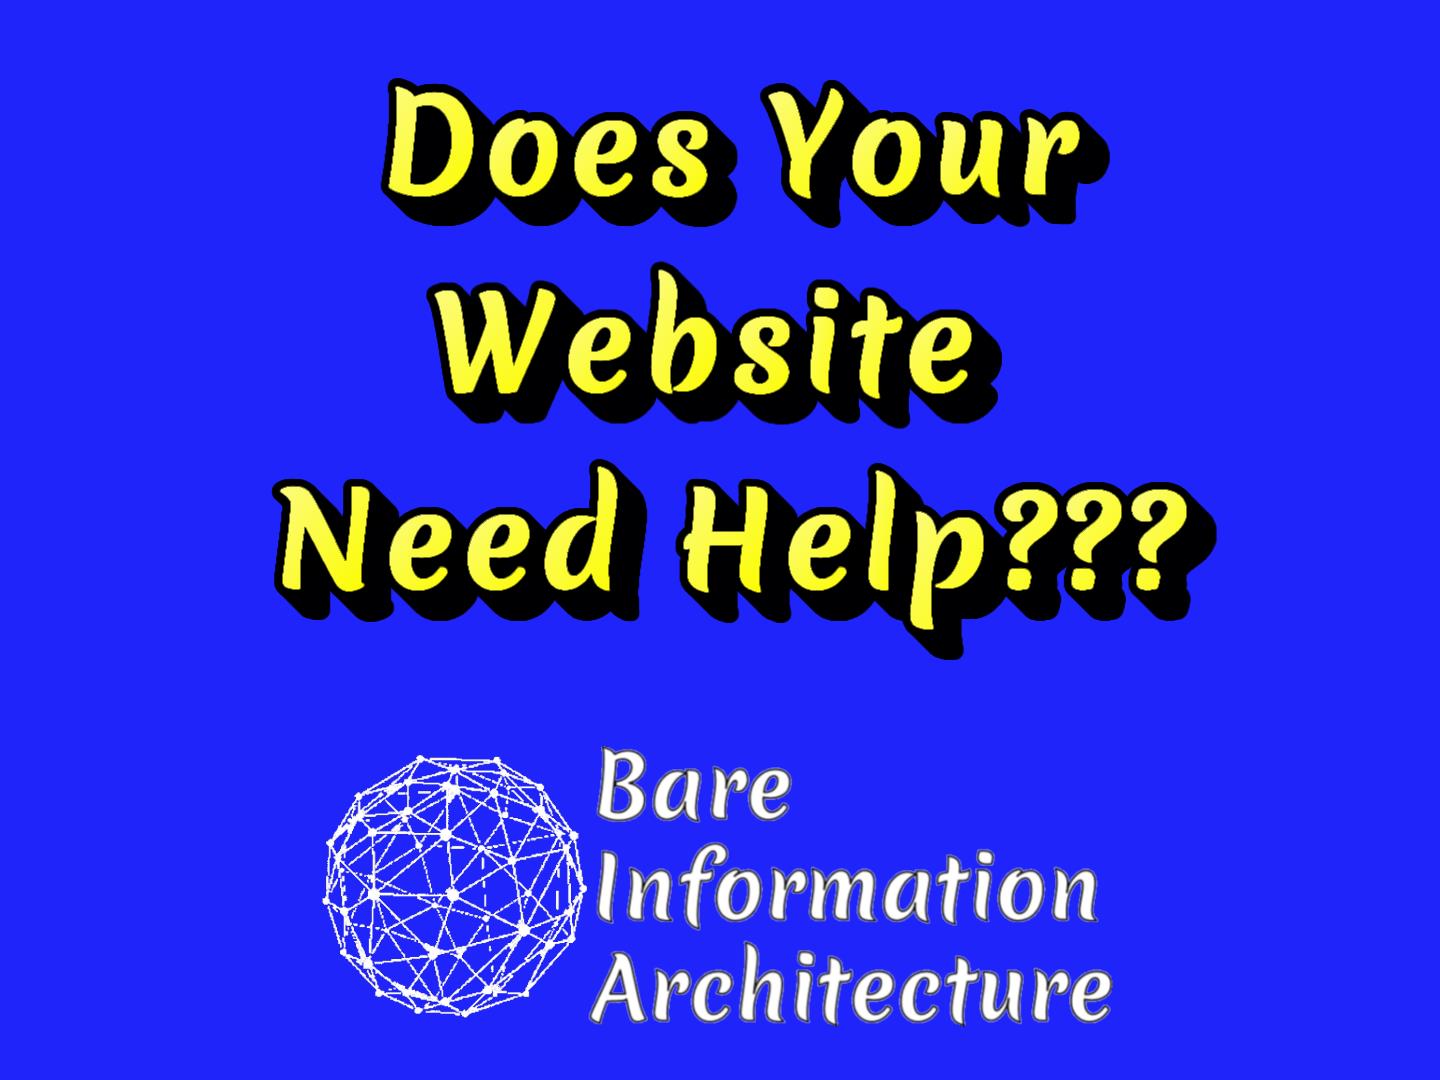 Does Your Website Need Help?